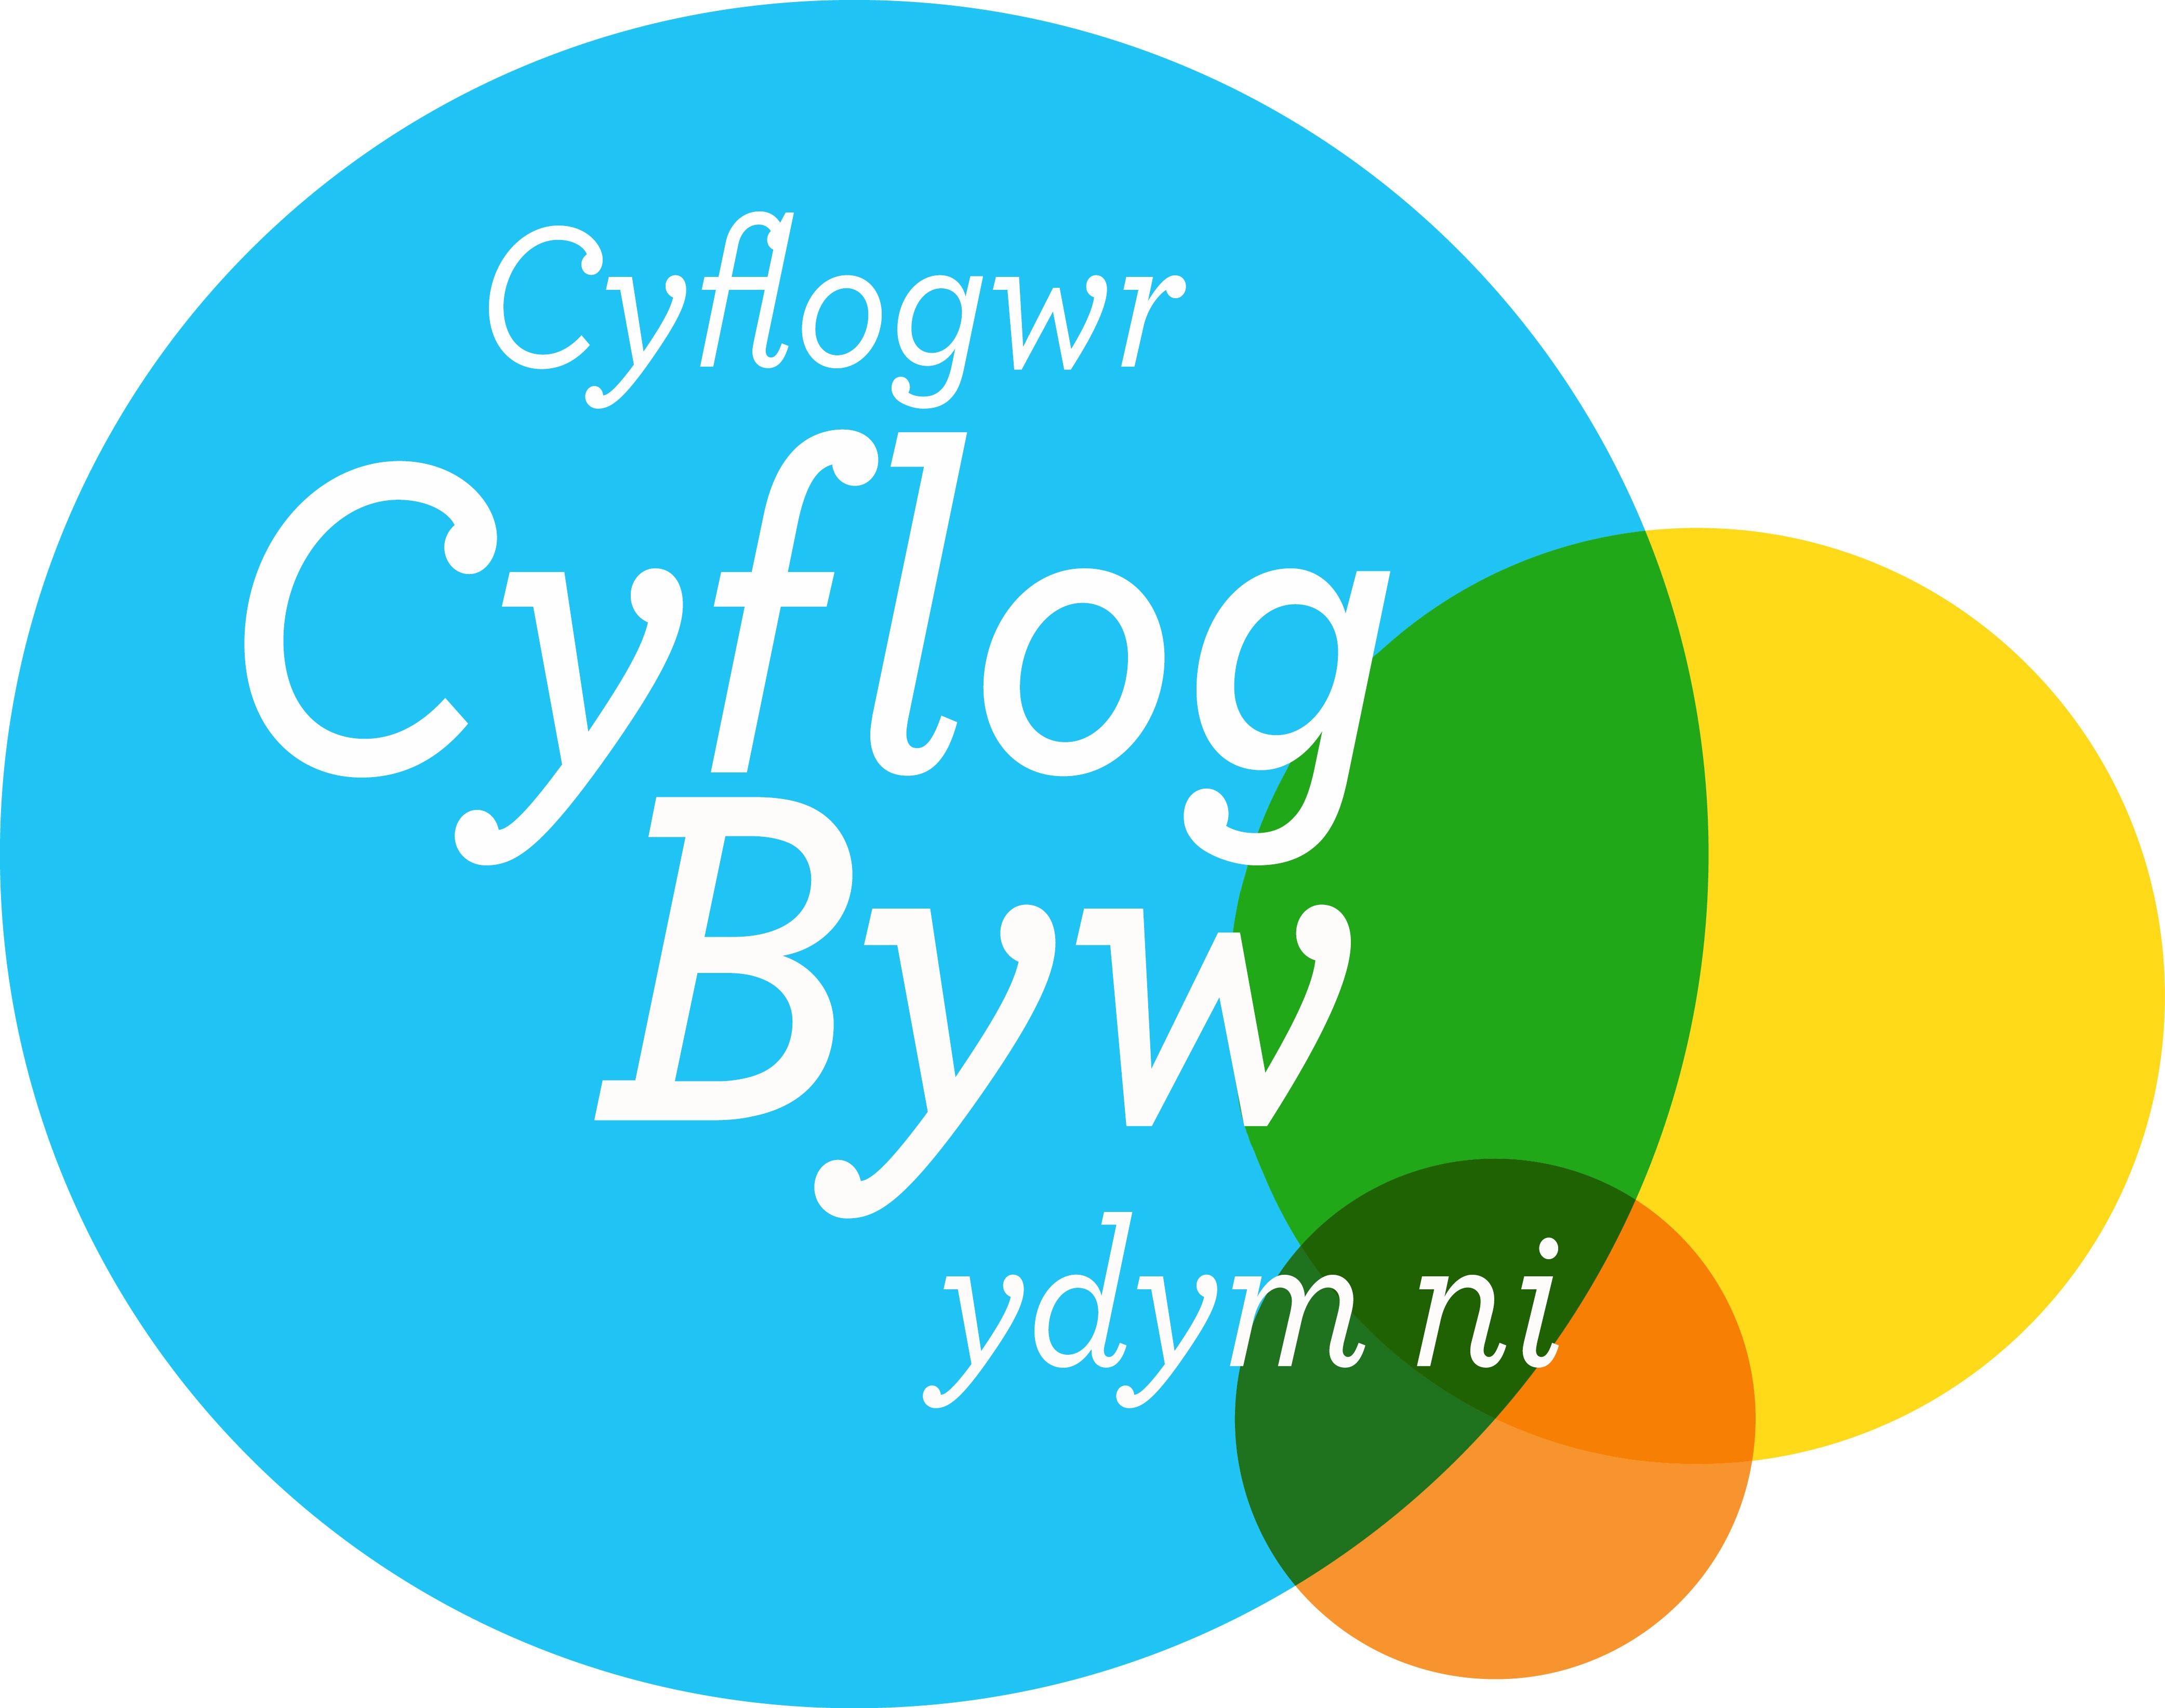 WELSH We are a Living Wage employer(1).jpeg